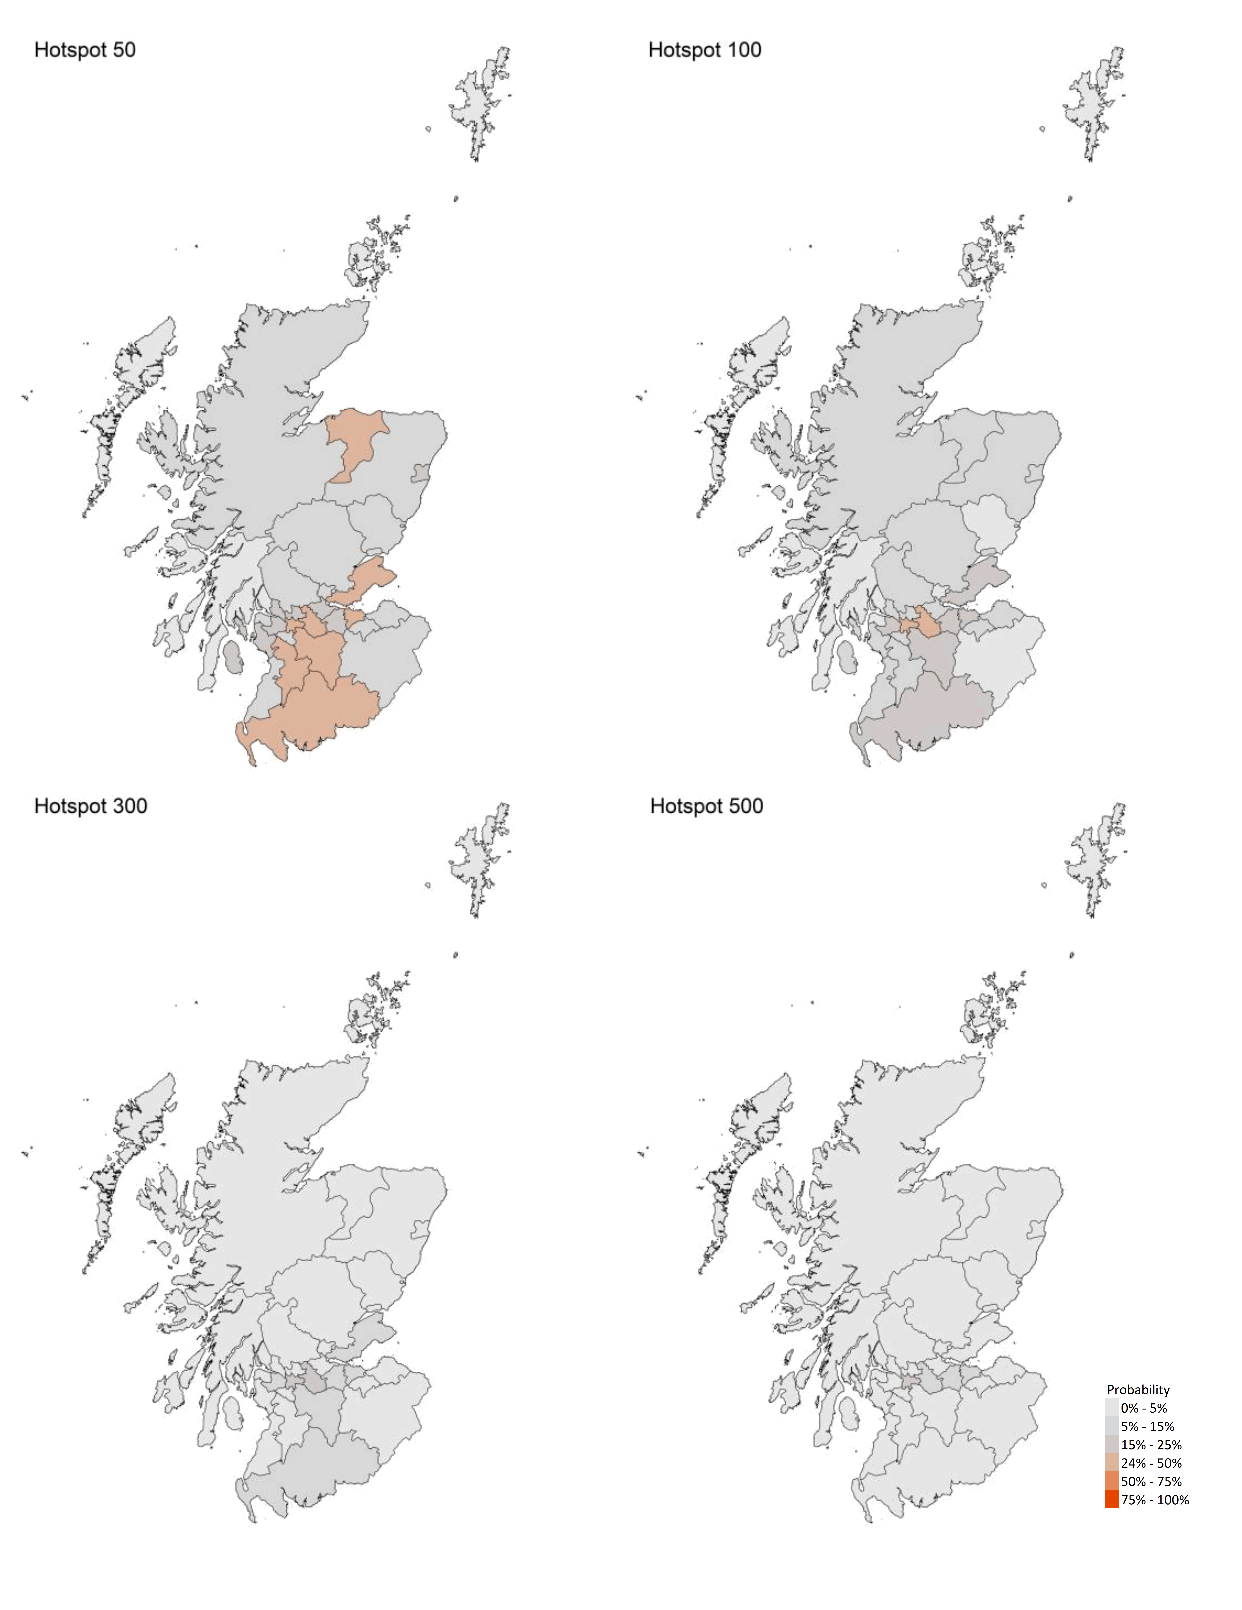 
This figure shows the probability of Local Authorities having more than 50, 100, 300 and 500 cases per 100,000 population. Hotspot is defined as an area that is predicted to exceed the cases threshold. The most recent modelling predicts that for the week ending 22 May, there are no local authorities with at least a 75% probability exceeding 50 cases per 100,000 population. 
